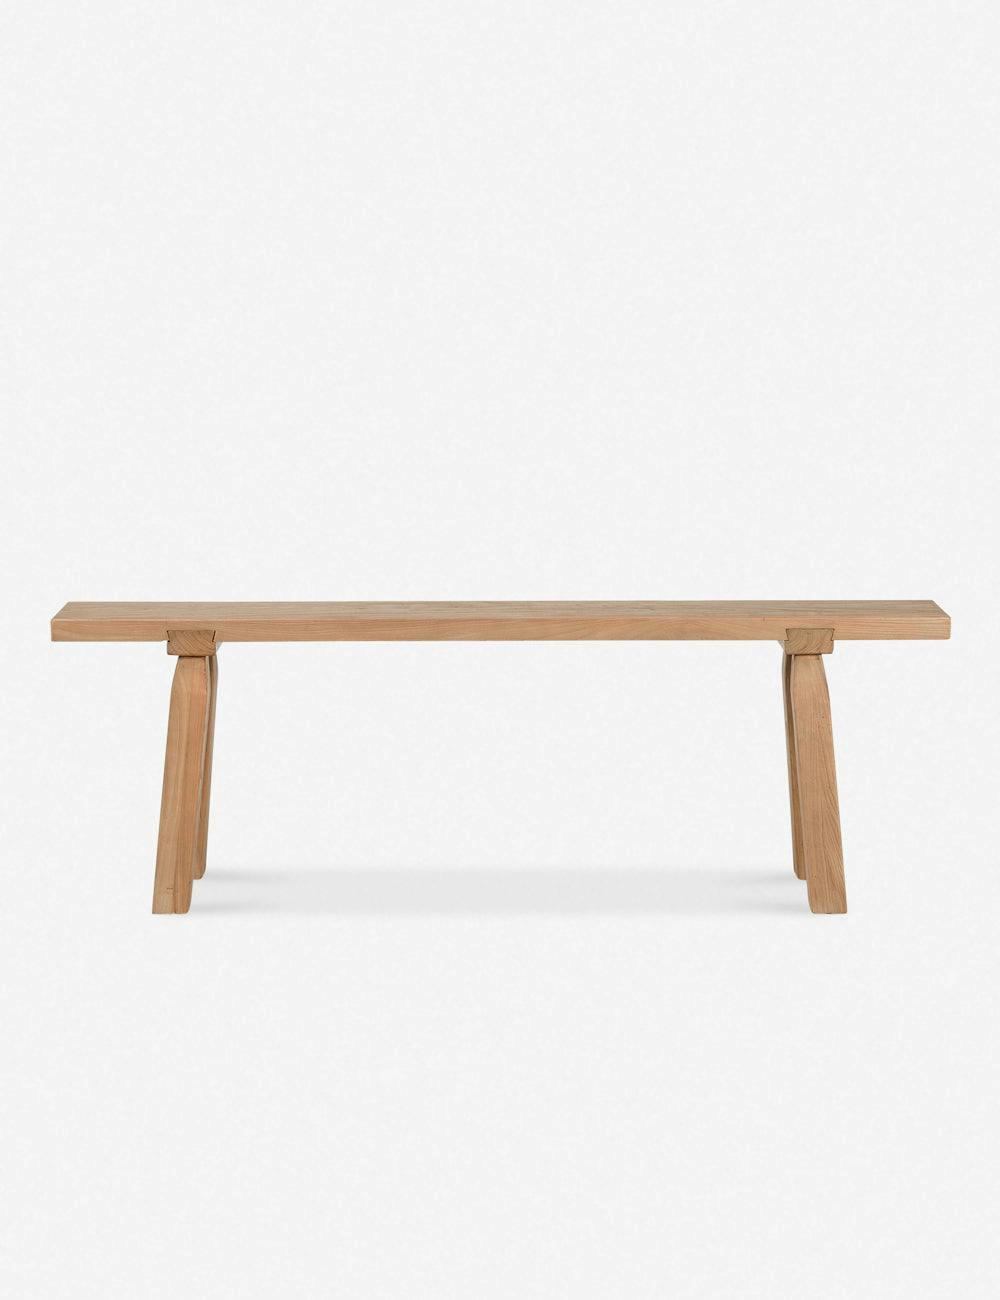 Lahana Rustic Natural Elmwood 60'' Bench with Tapered Legs